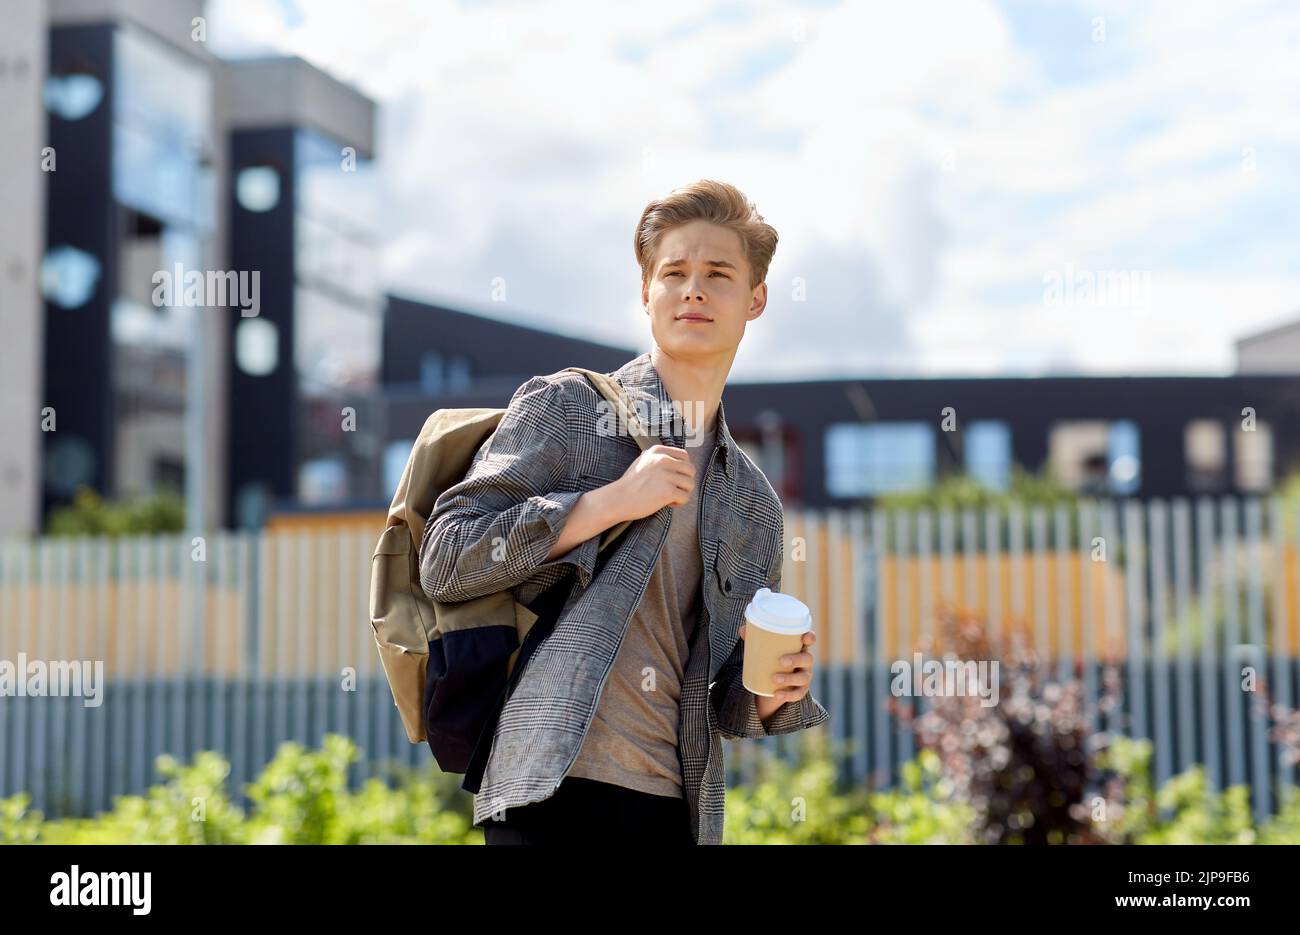 young man with backpack drinking coffee in city Stock Photo